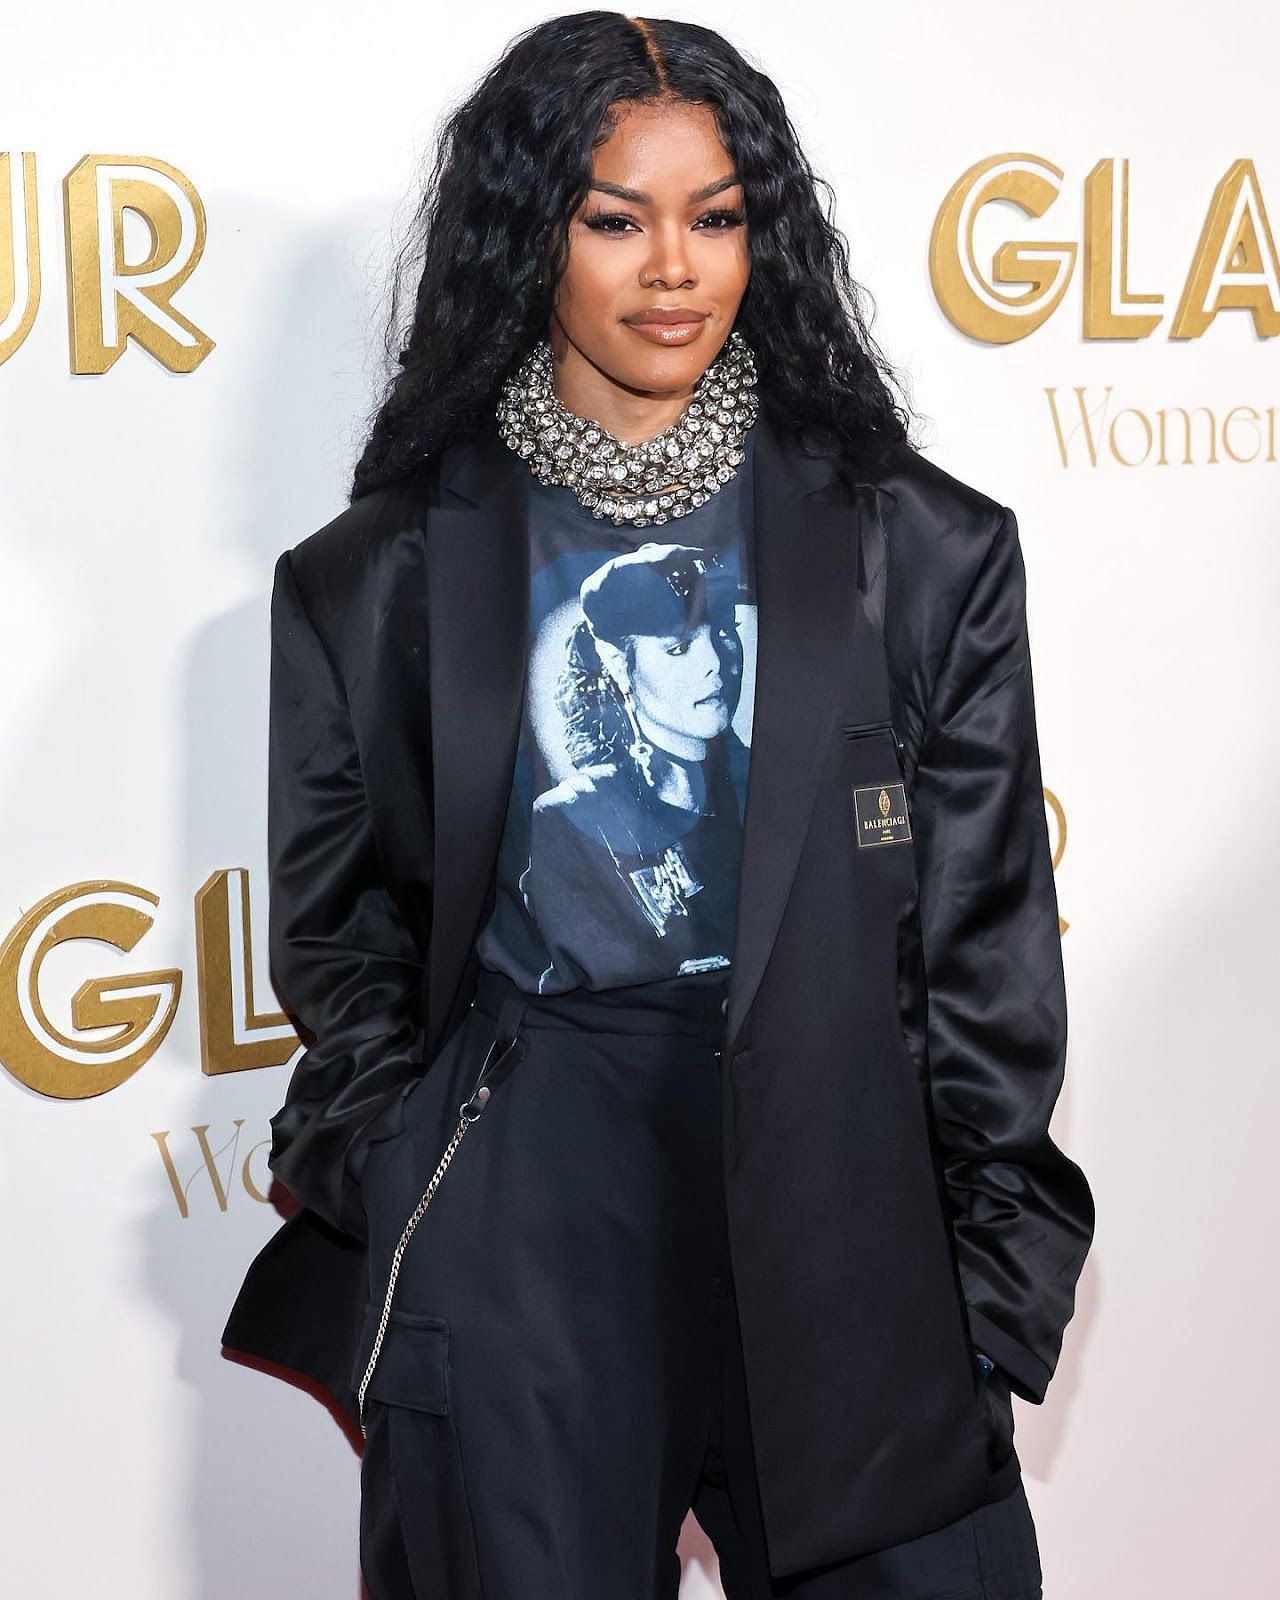 What are the achievements of Teyana Taylor?